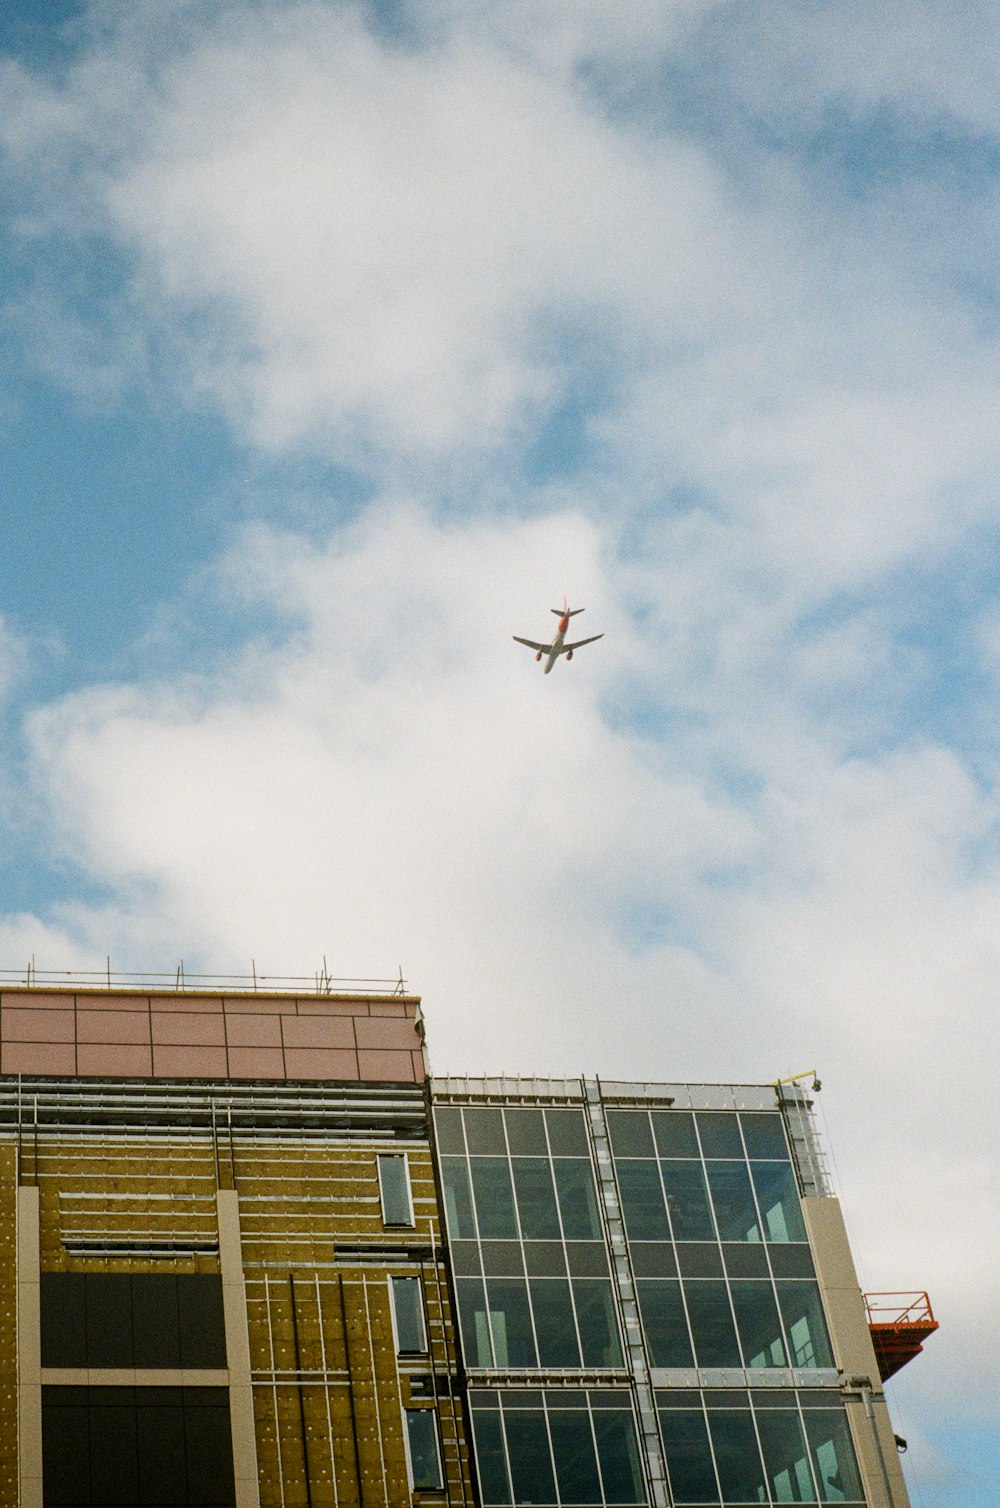 an airplane flying over a building under a cloudy sky